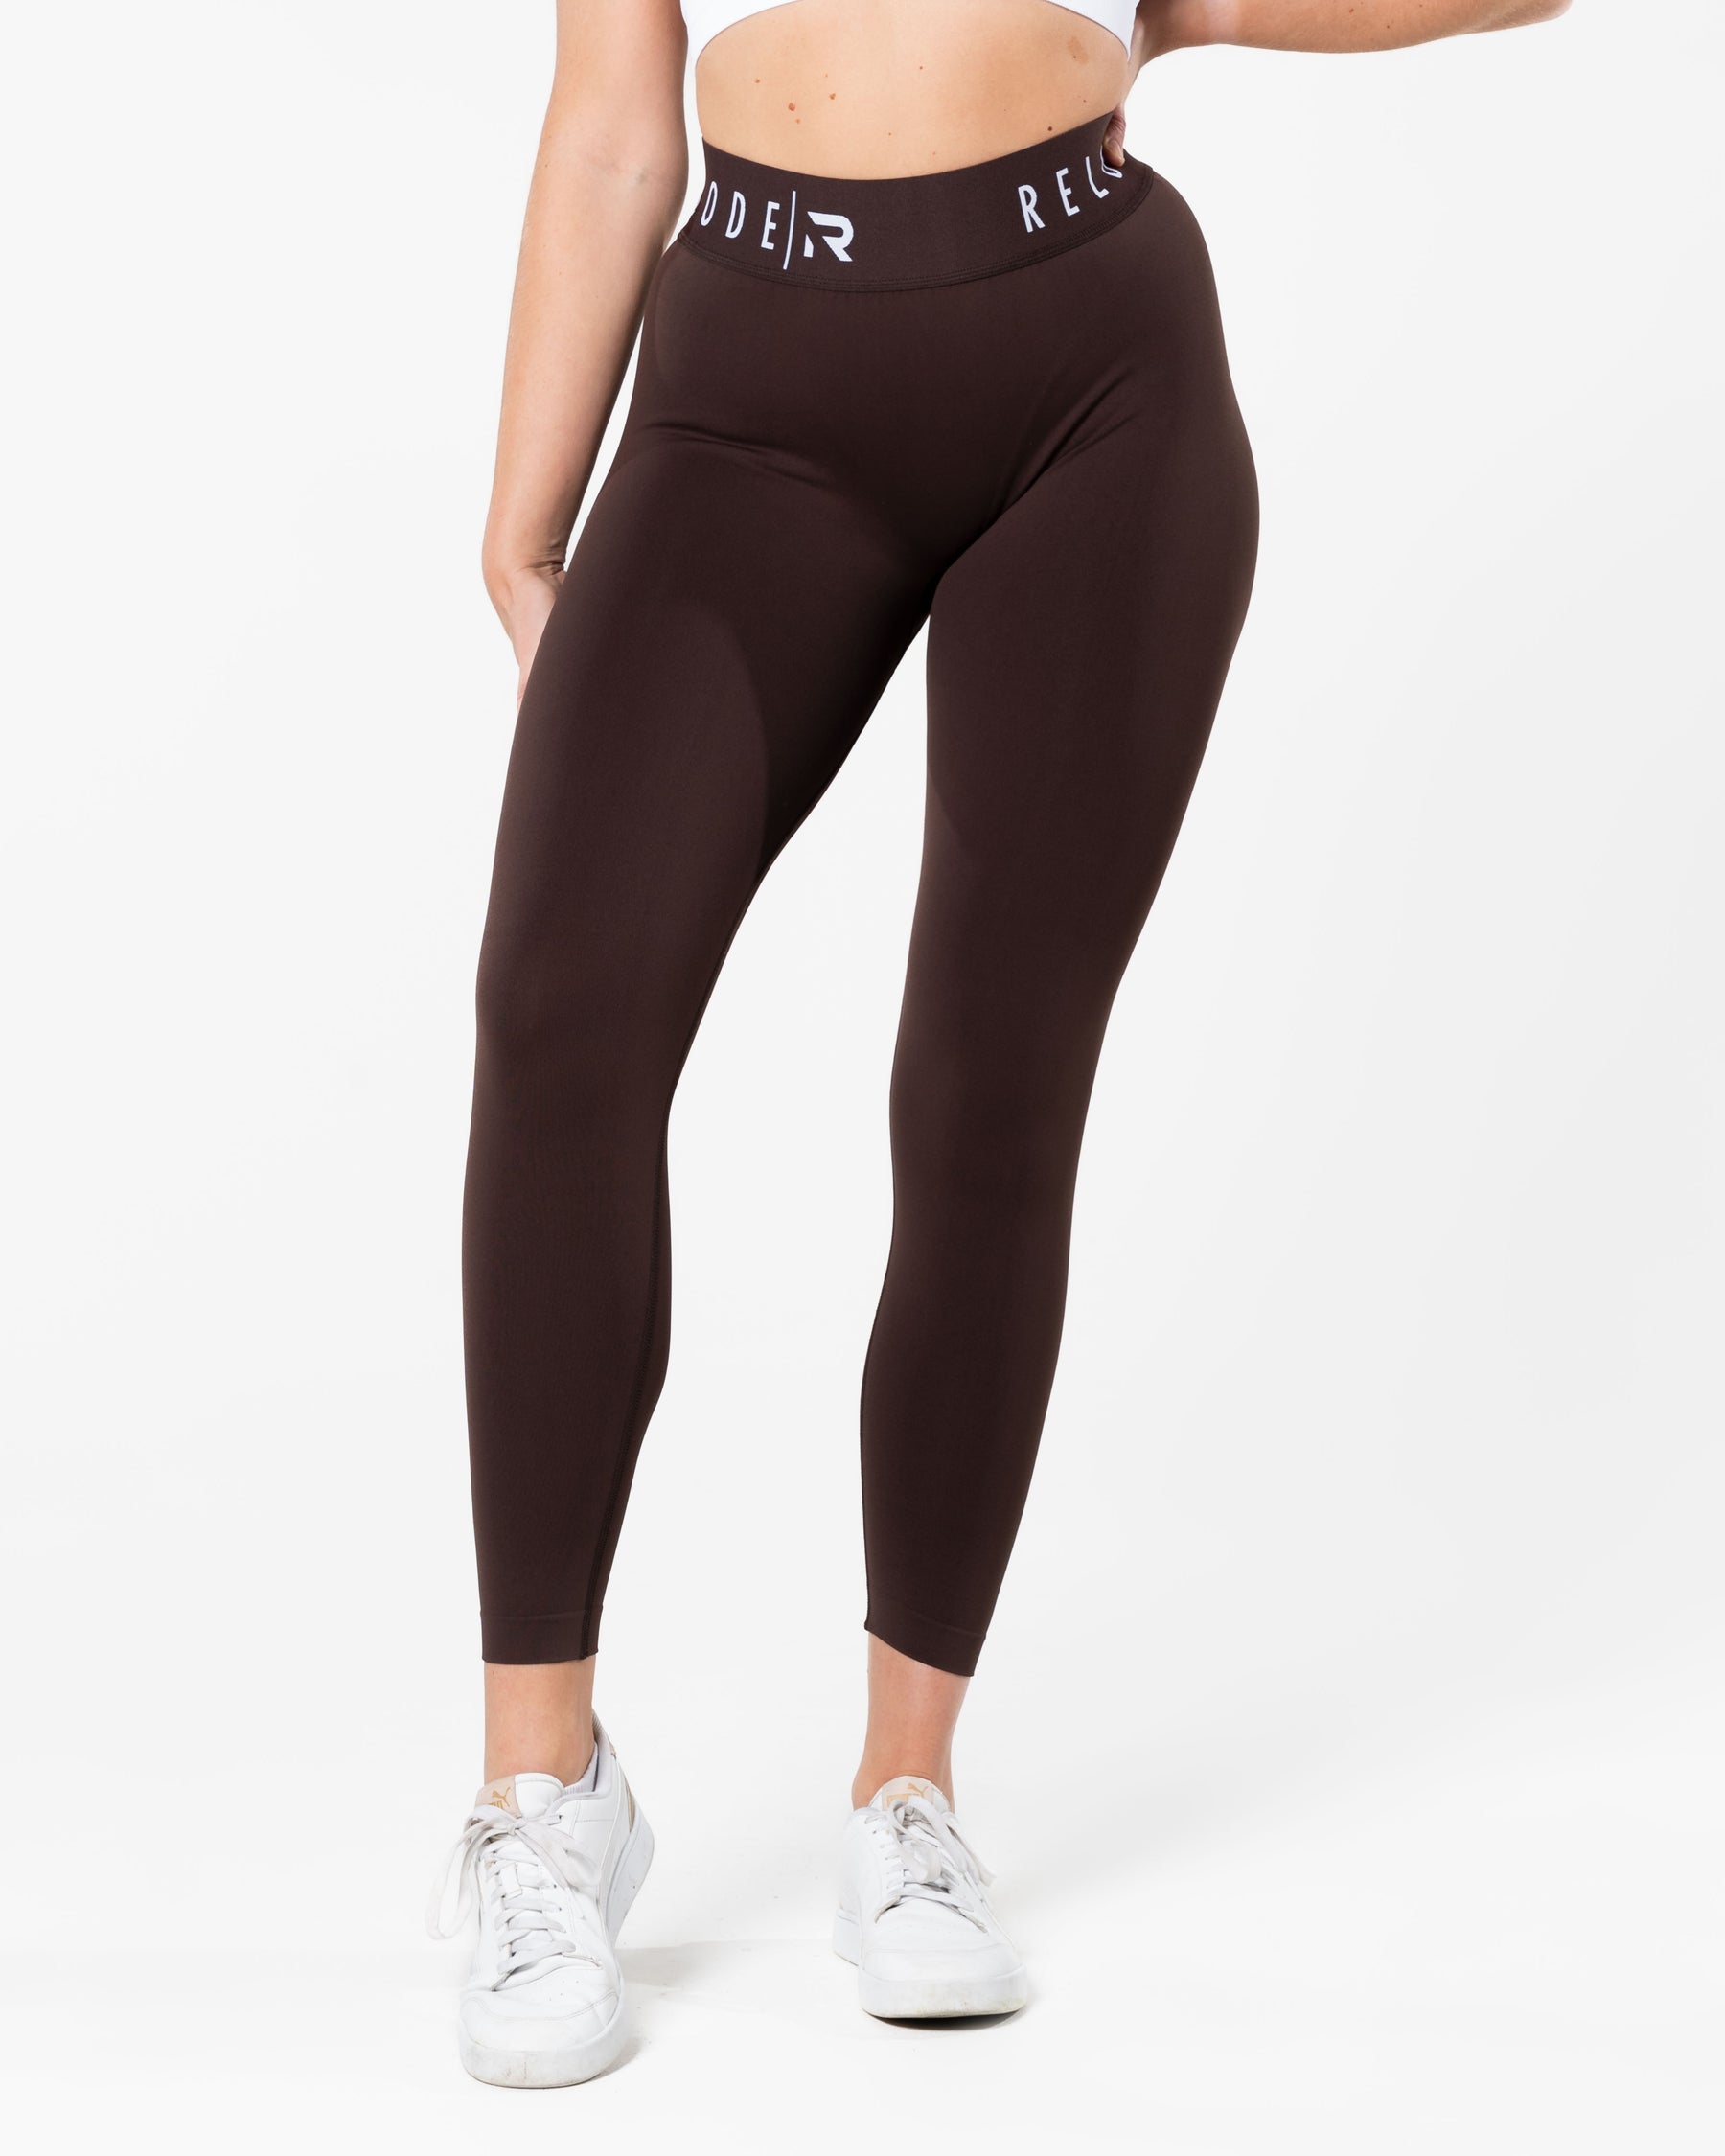 Prime Seamless Tights - Brown - RELODE